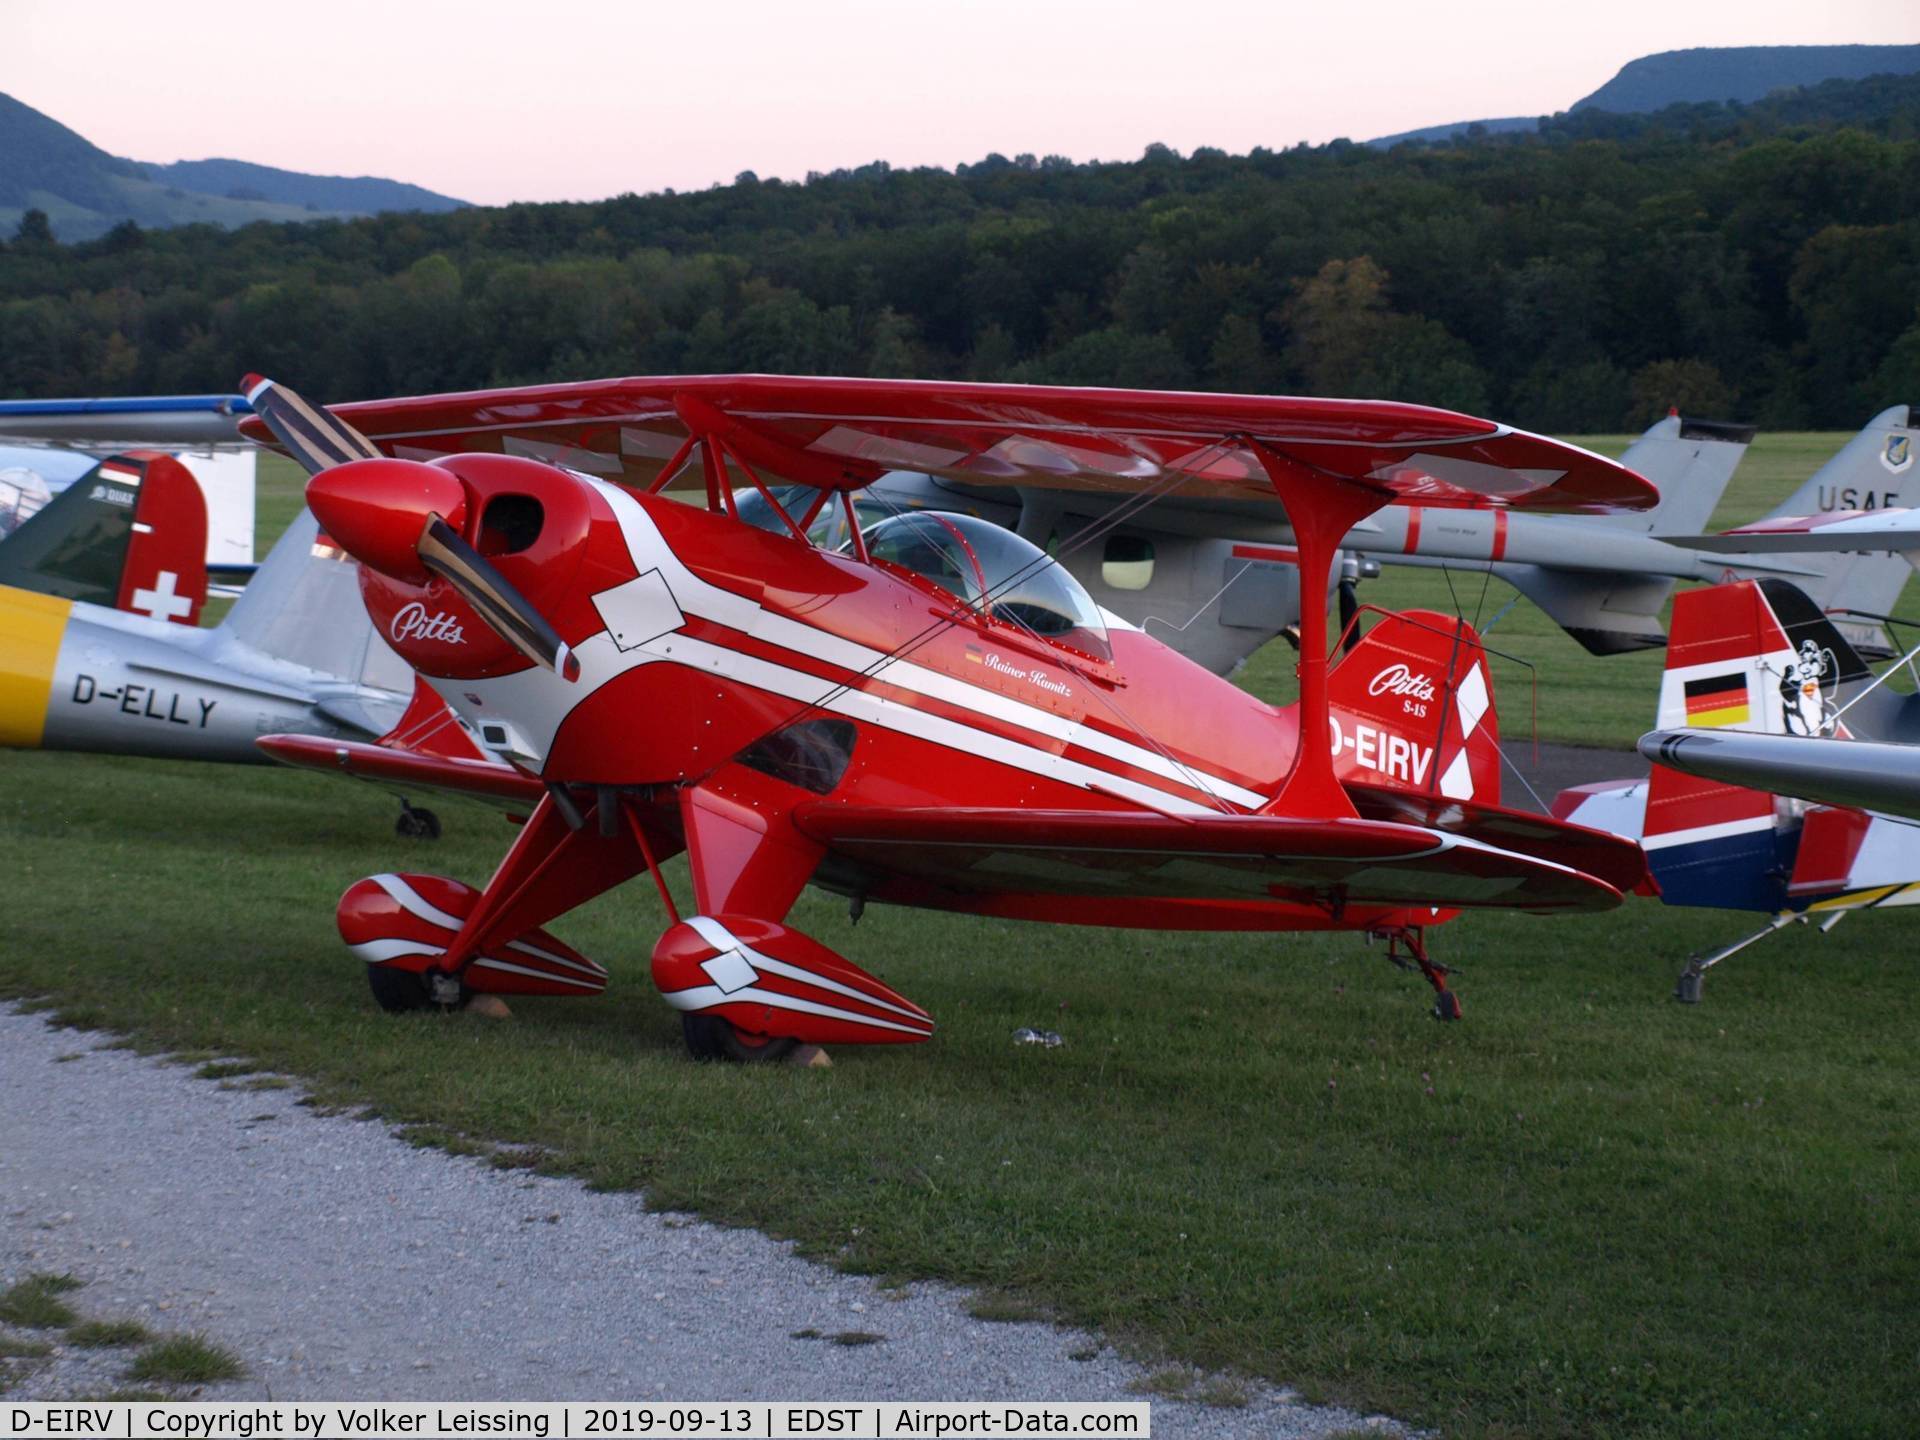 D-EIRV, 1972 Pitts S-1S Special C/N 1-0045, parking at OTT19